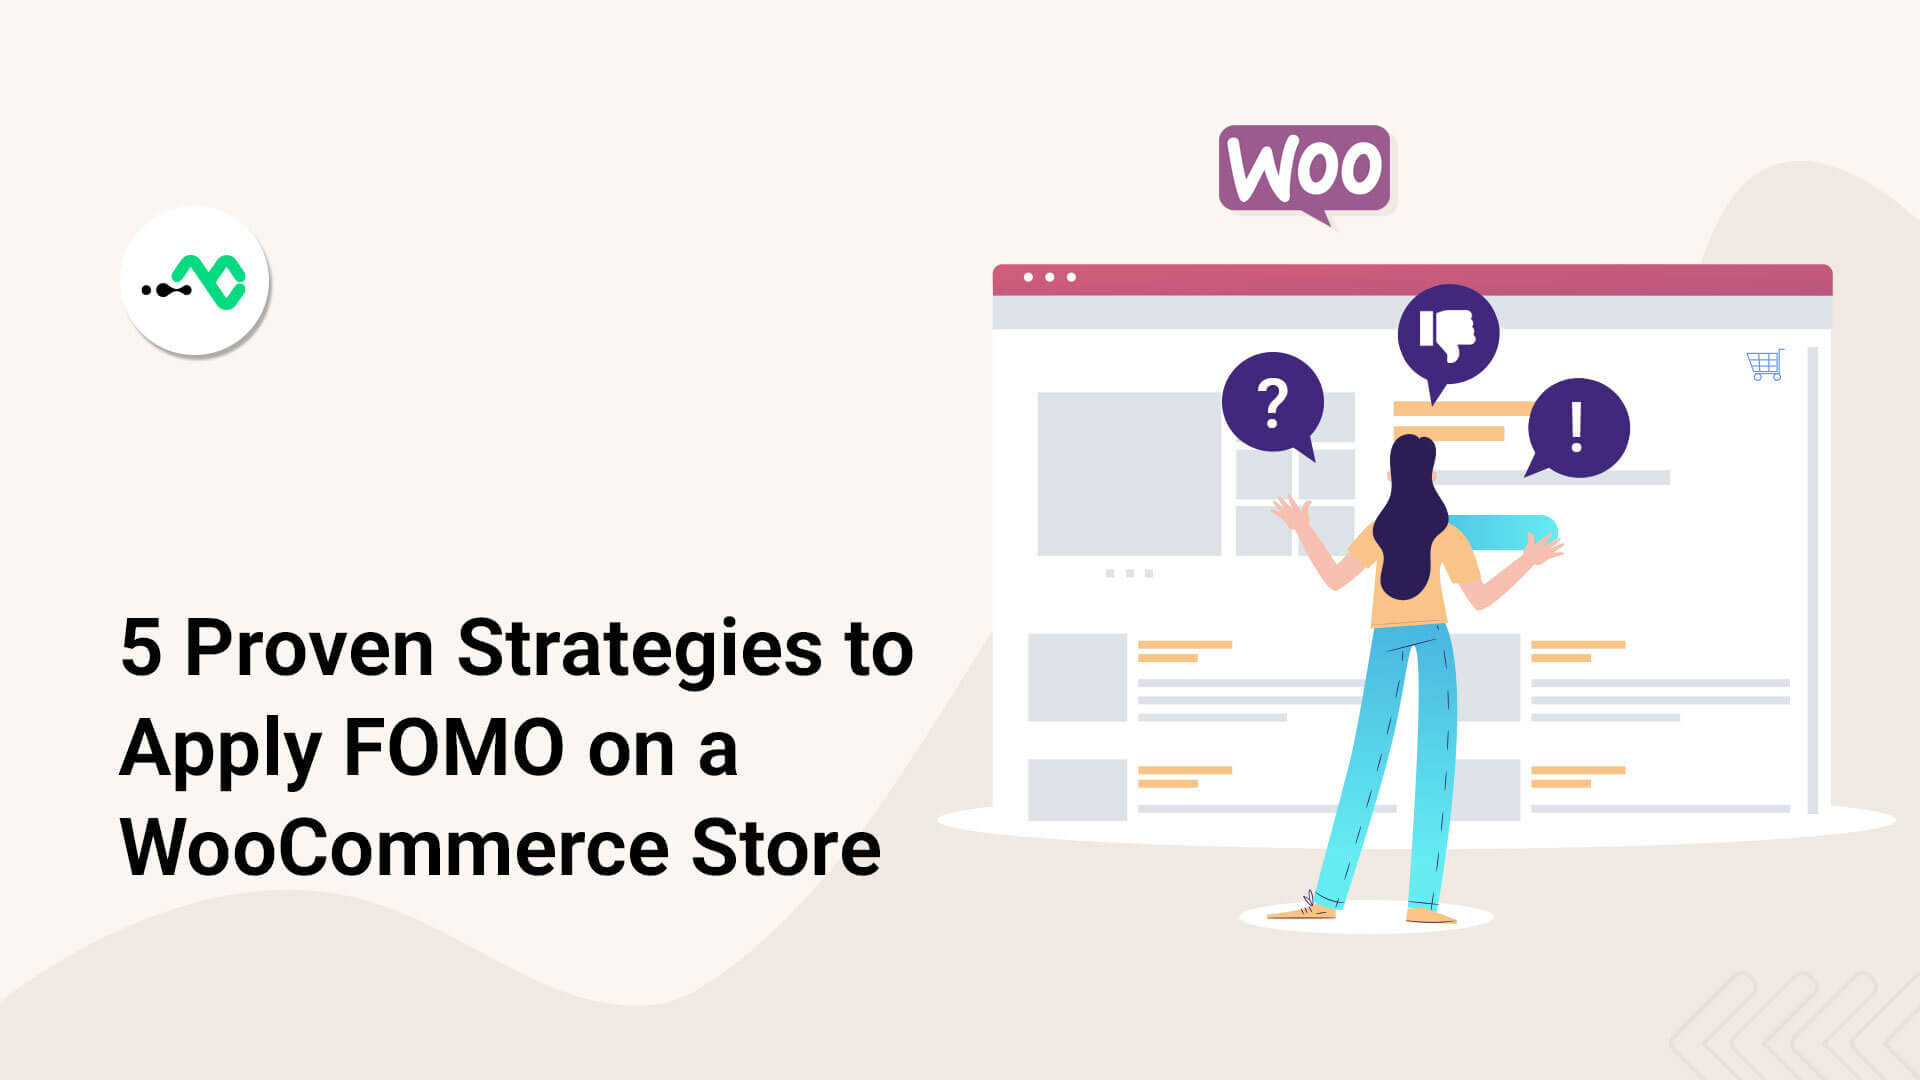 Proven Strategies to Apply FOMO on a WooCommerce Store